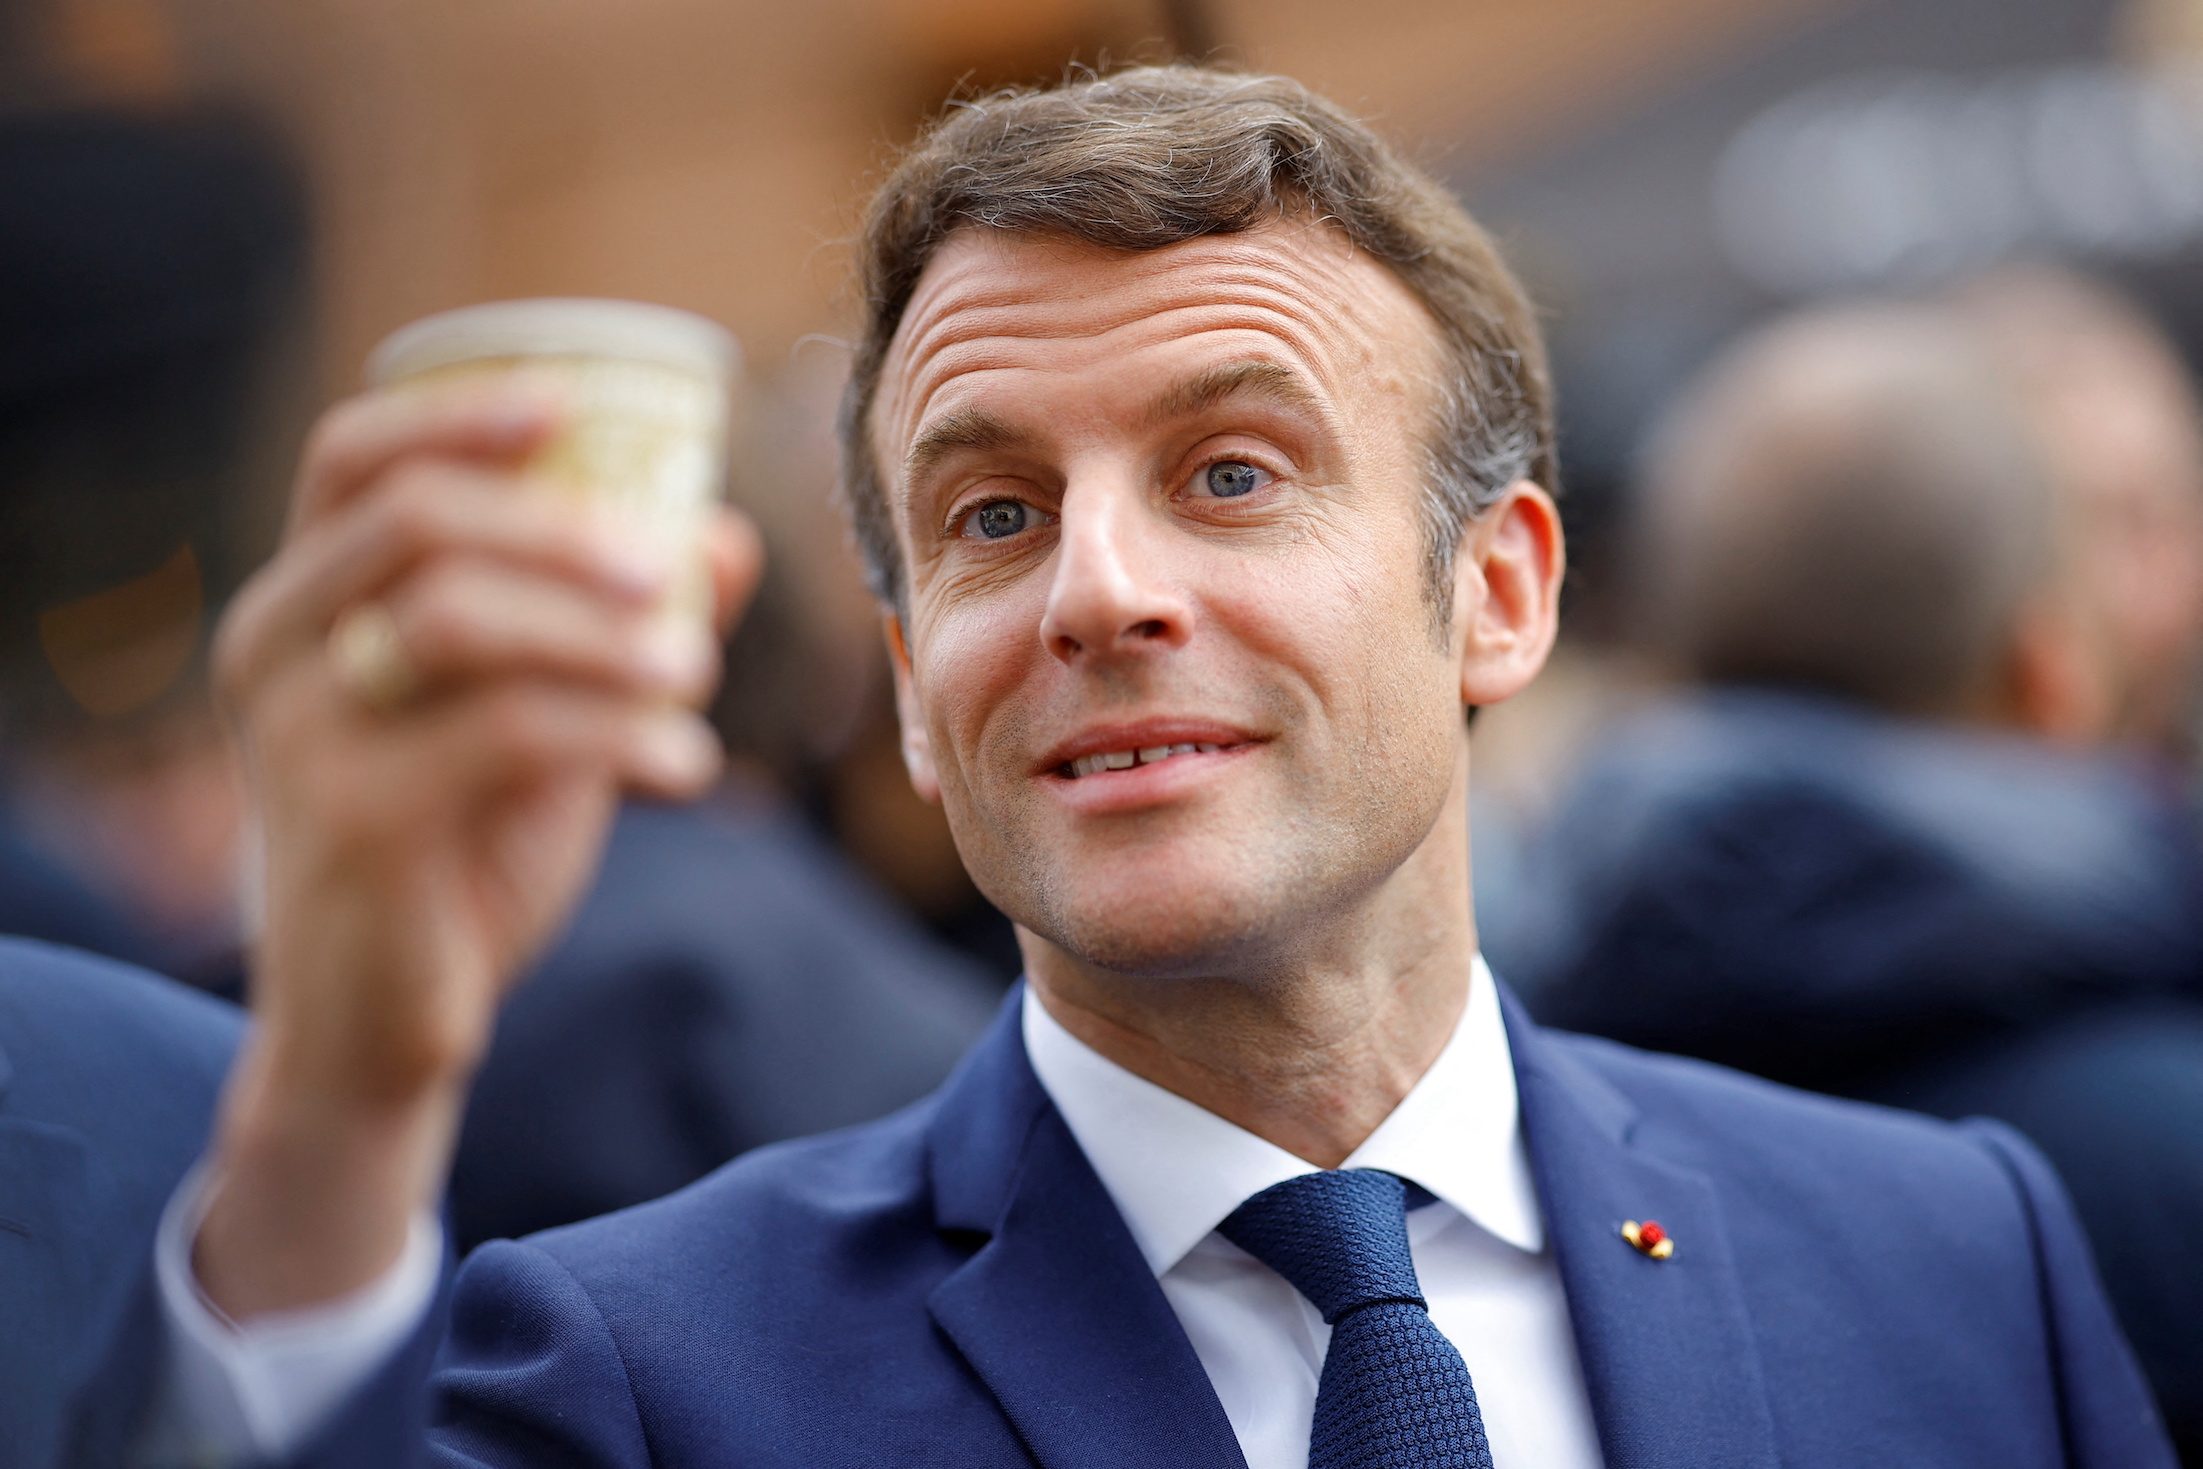 Who might upset Macron’s bid for a second term in office?